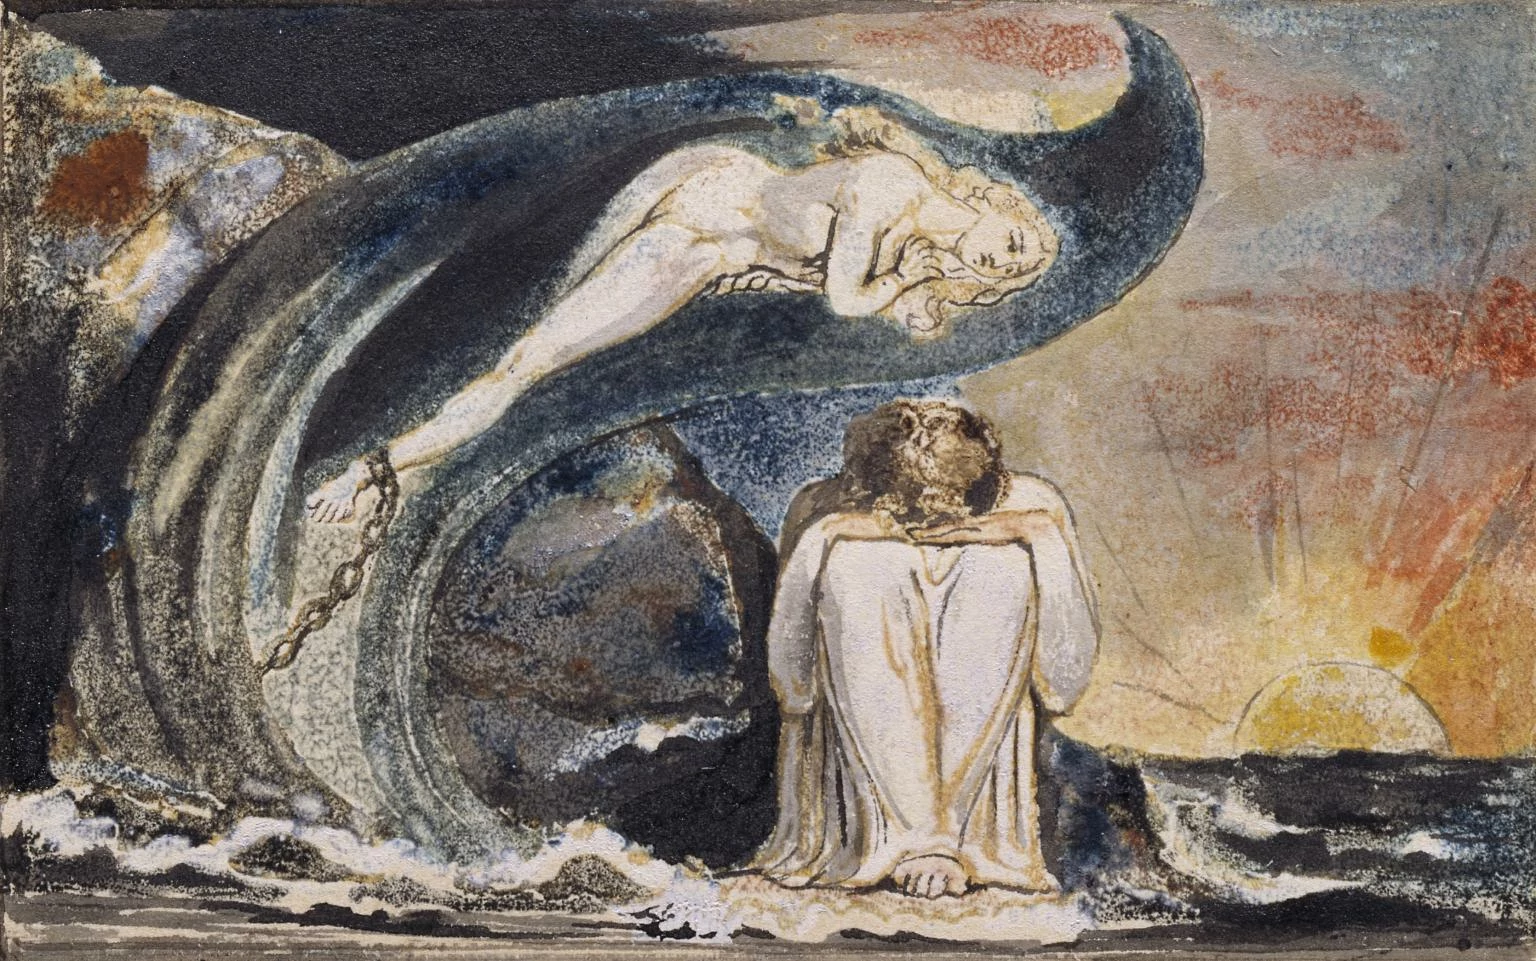 Visions of the Daughters of Albion (Plate 4), William Blake